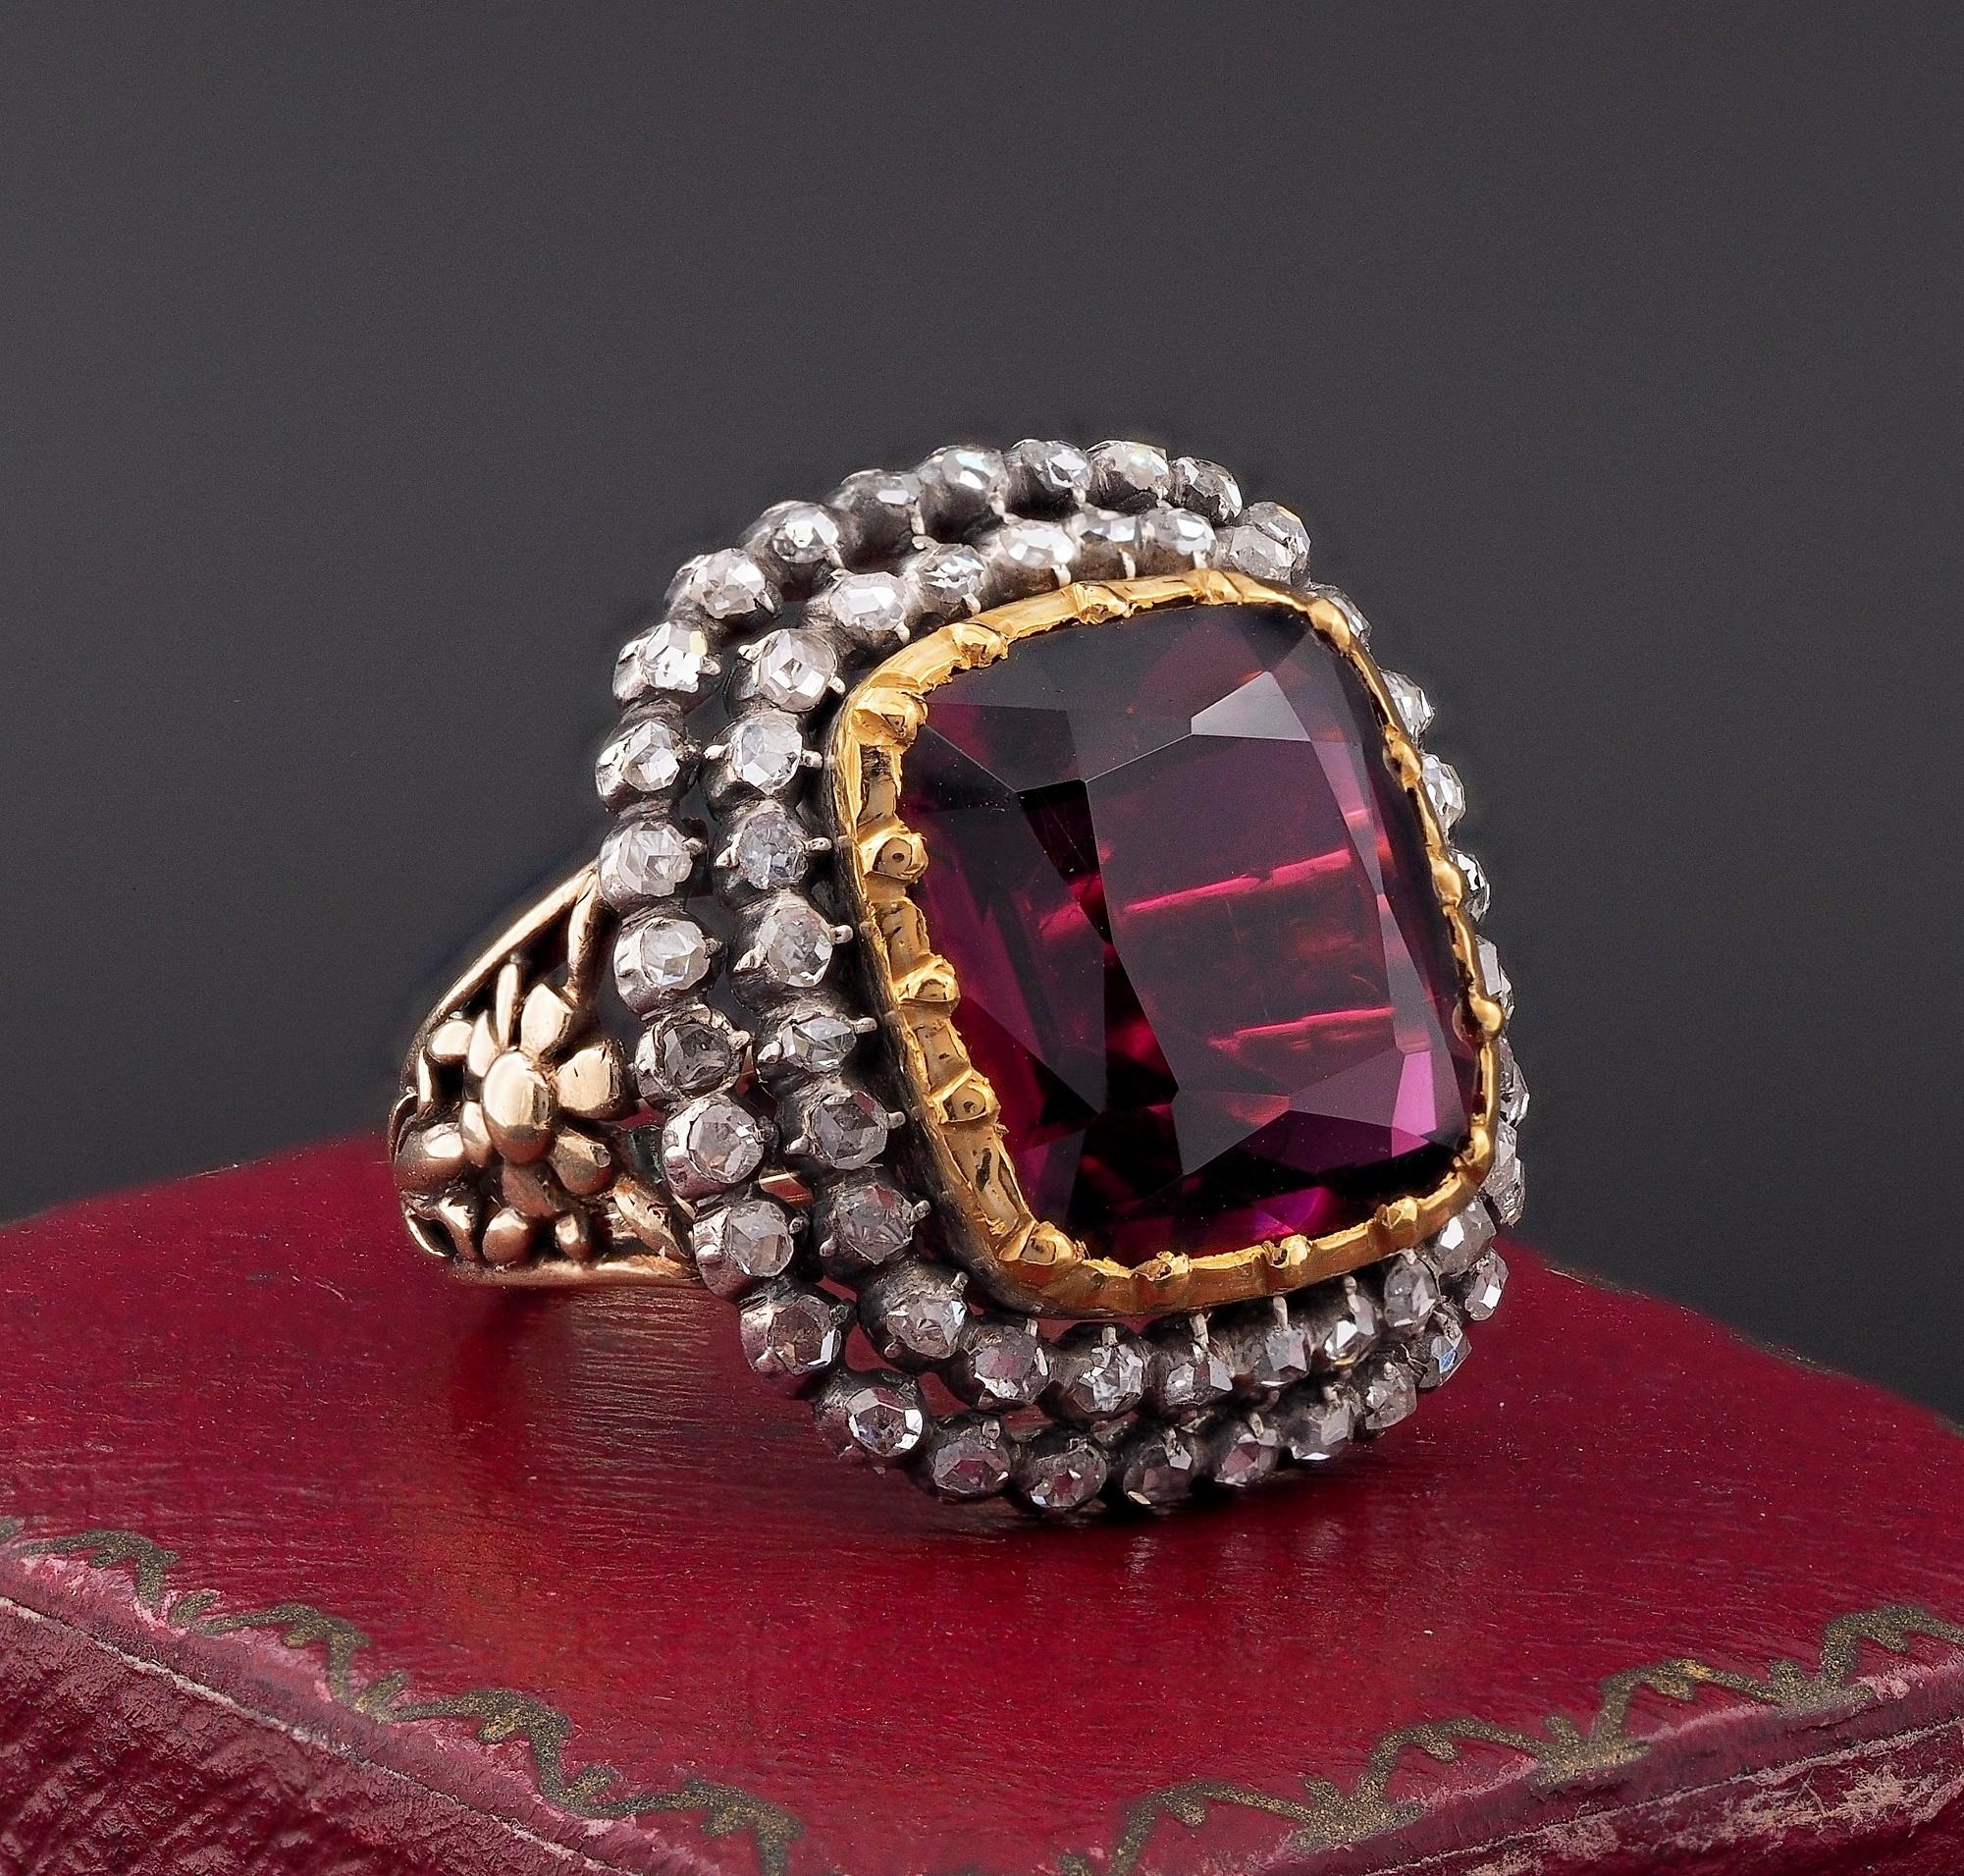 Women's Victorian 10.95 CT Untreated Magenta Rubellite or Red Tourmaline Diamond Ring For Sale